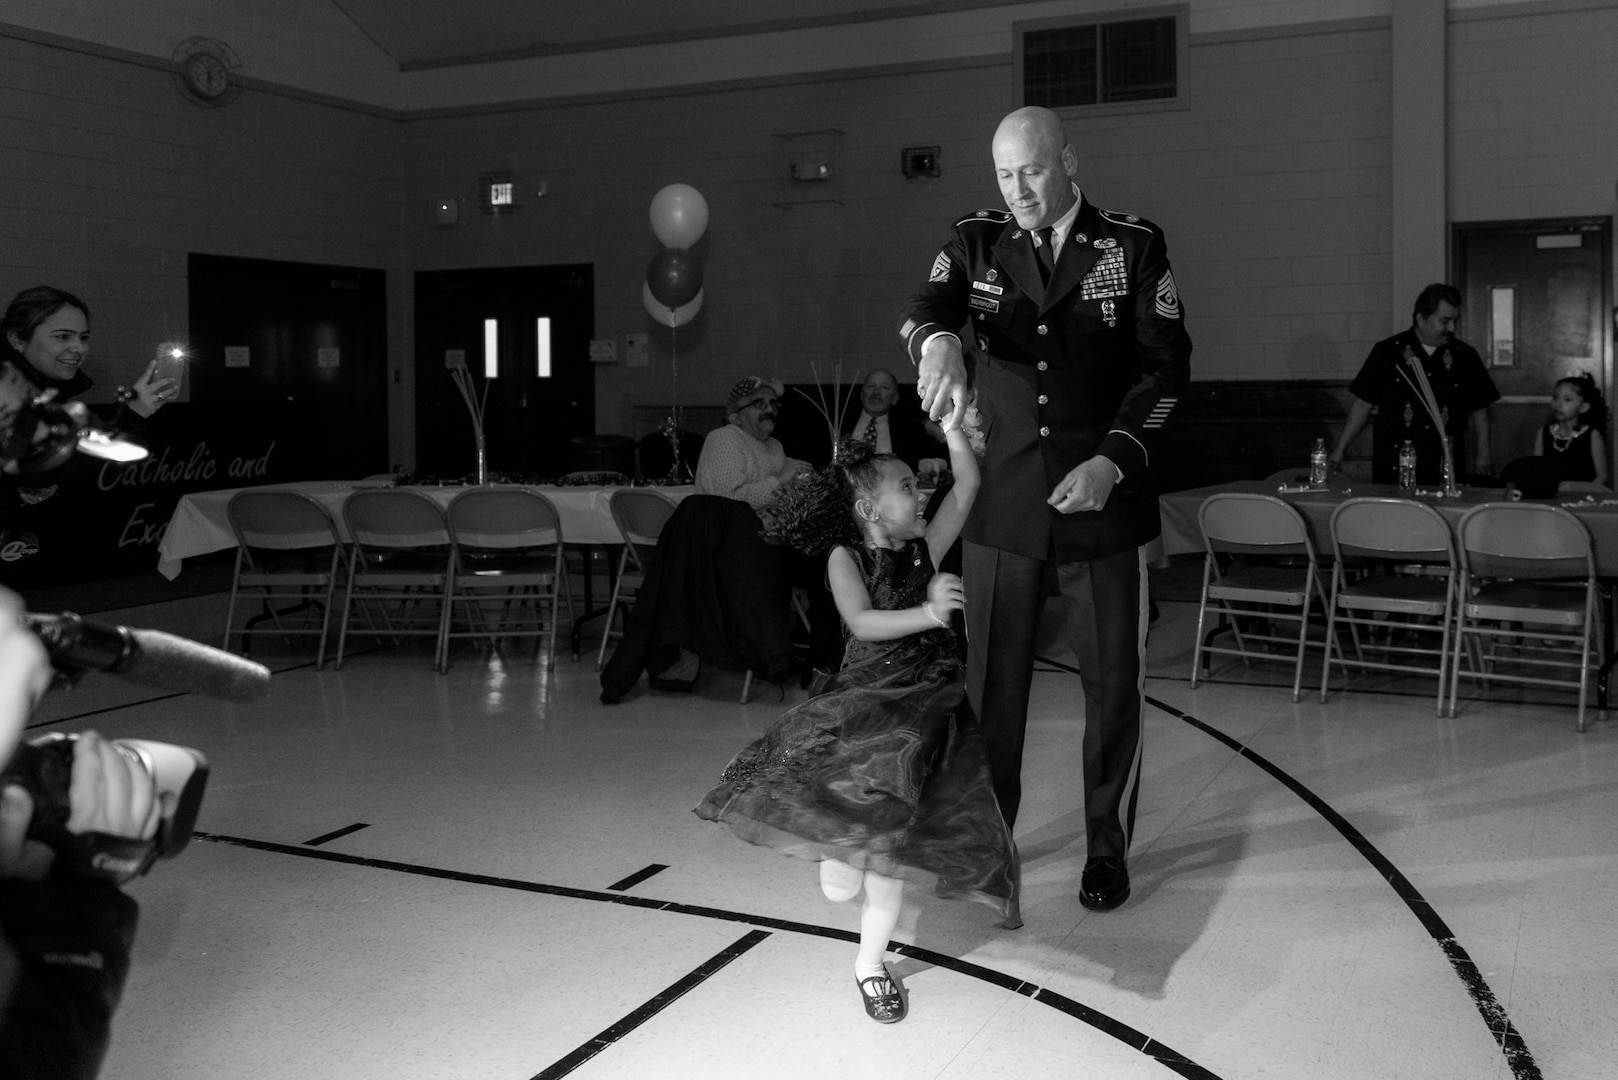 Cayleigh Hinton, daughter of Sgt. Terrence Hinton, dances with 1st Sgt. Joseph Bierbrodt of Sheridan, Illinois, with the 933rd Military Police Company, Feb. 7, at a father-daughter dance held at the Our Lady of Humility School in Beach Park, Illinois.